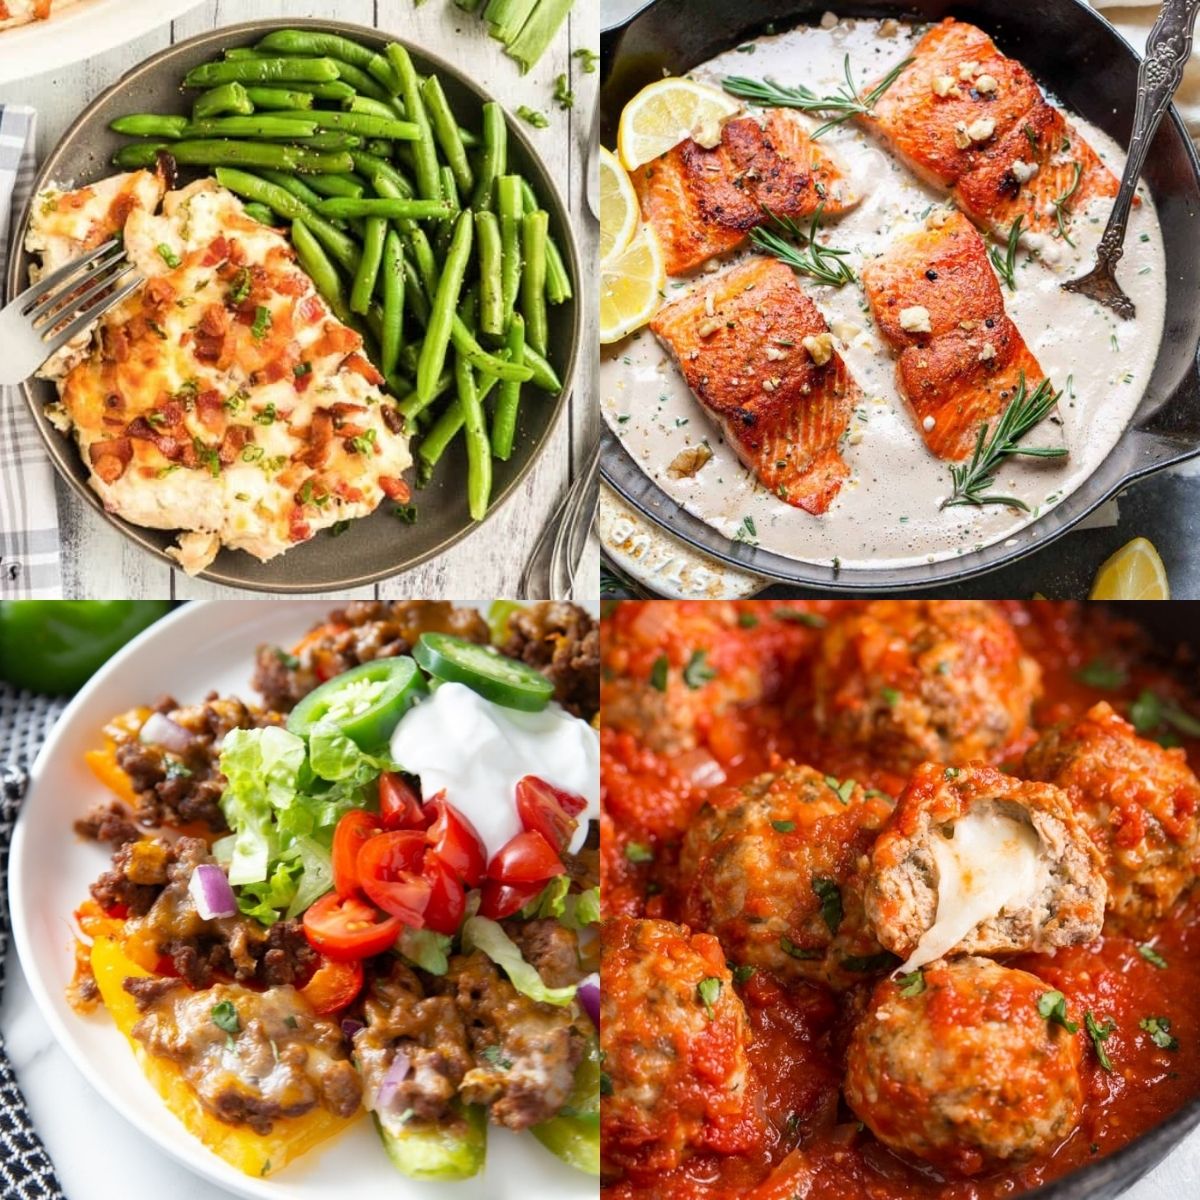 20 Under 10g Carb Meals for When You're on Keto